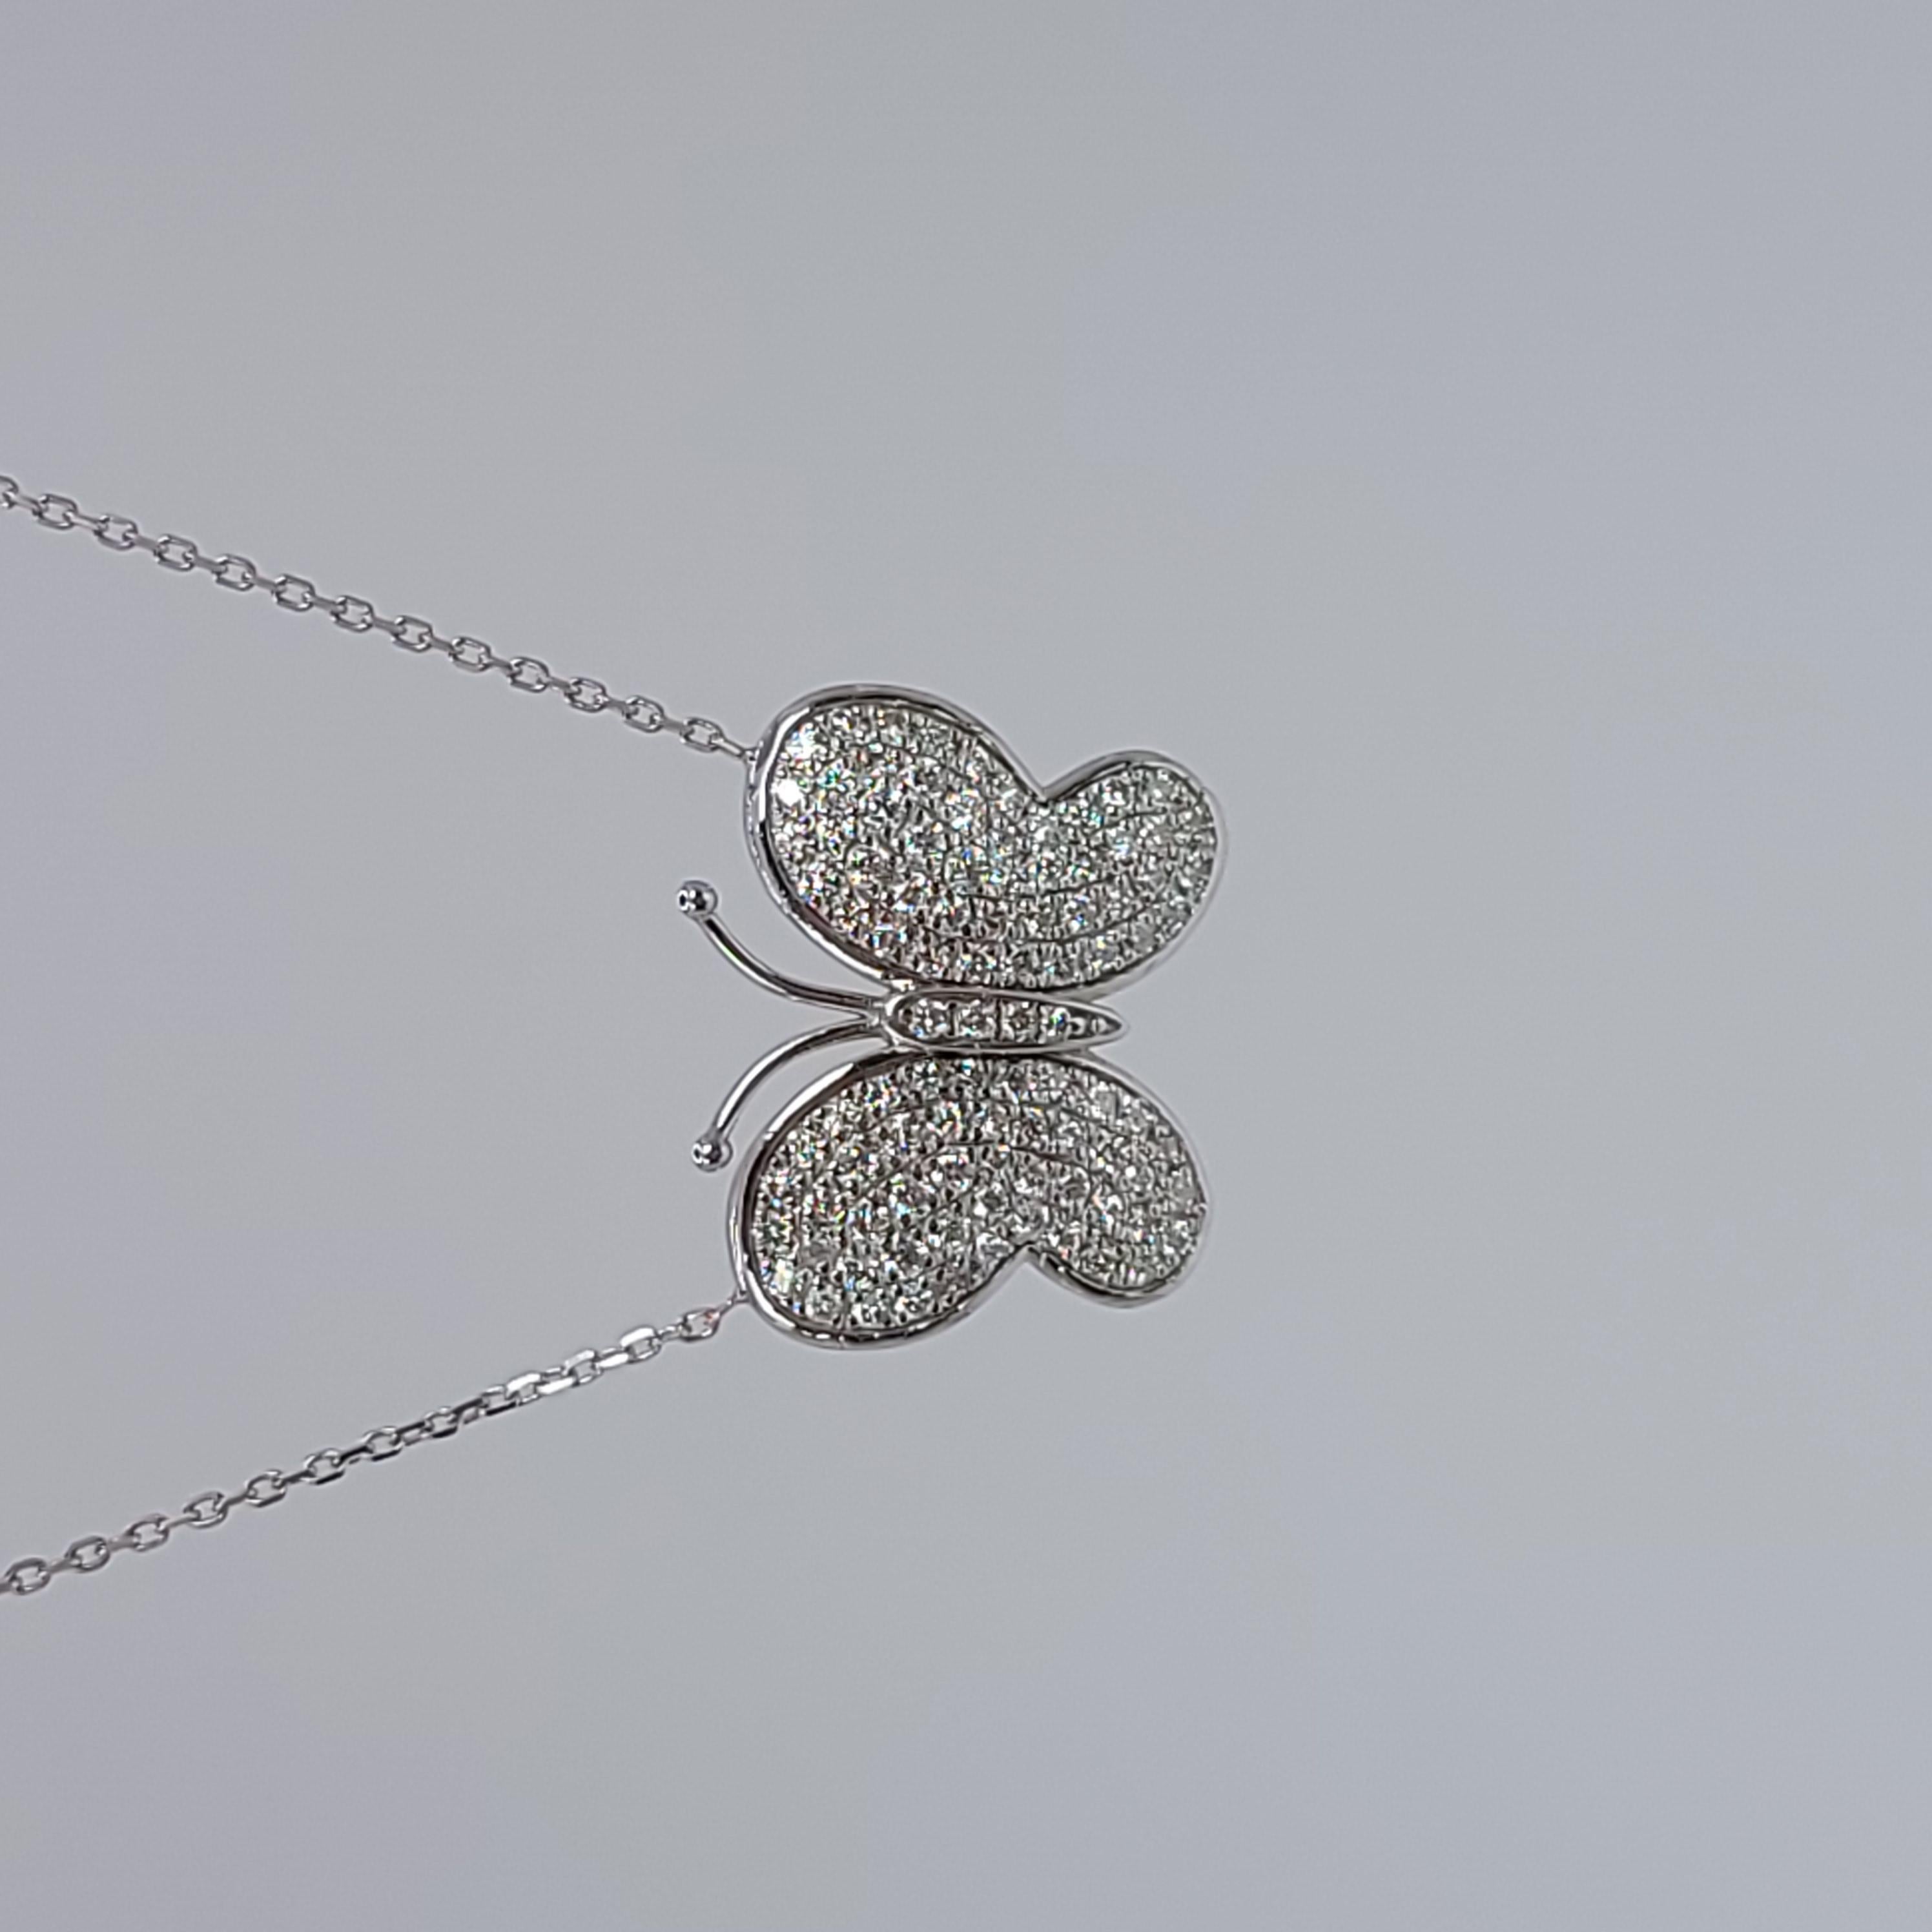 Butterfly necklace with natural diamonds in 14KT white gold made with 1ct of diamonds.

GRAM WEIGHT: 4.47gr
GOLD: 14KT white gold
NECKLACE chain-18